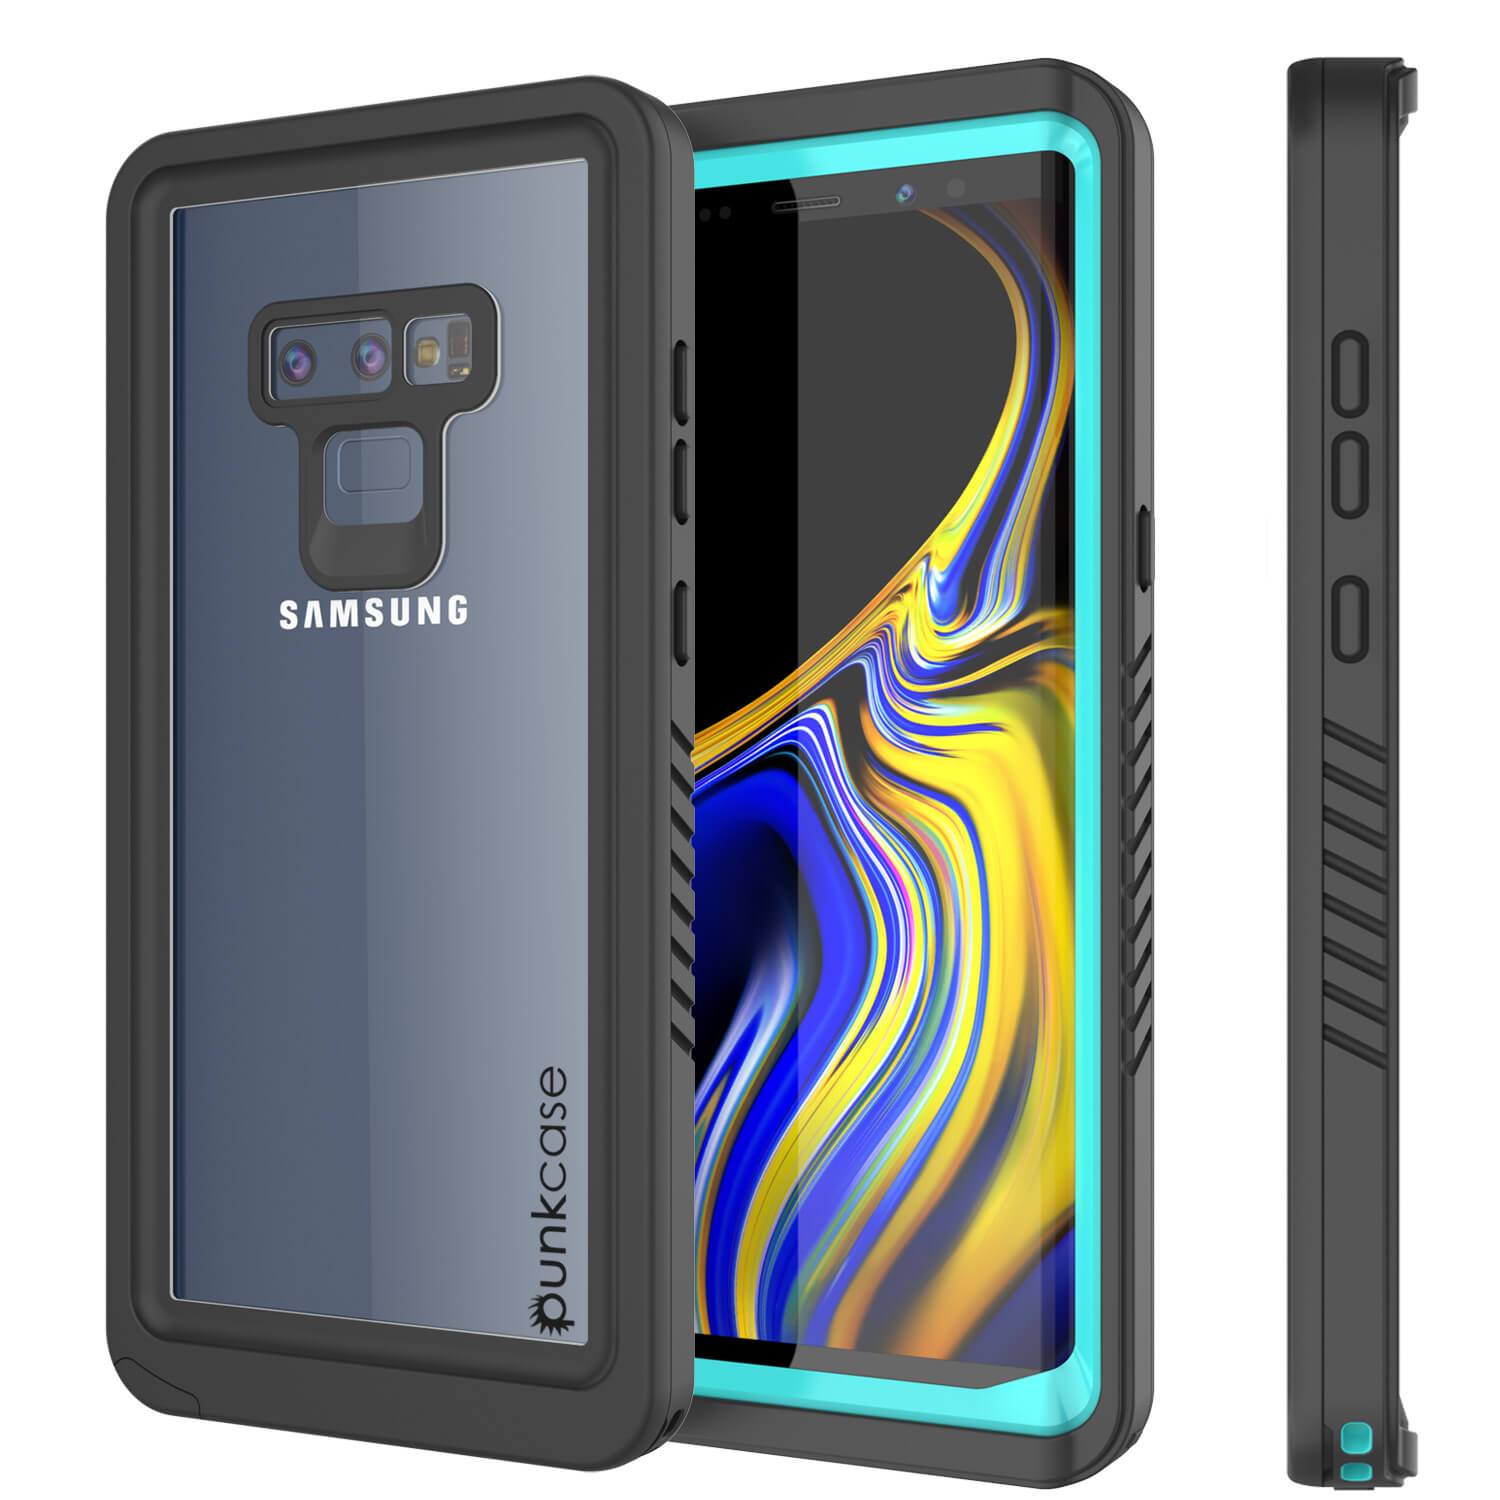 Galaxy Note 9 Case, Punkcase [Extreme Series] Armor Cover W/ Built In Screen Protector [Teal]